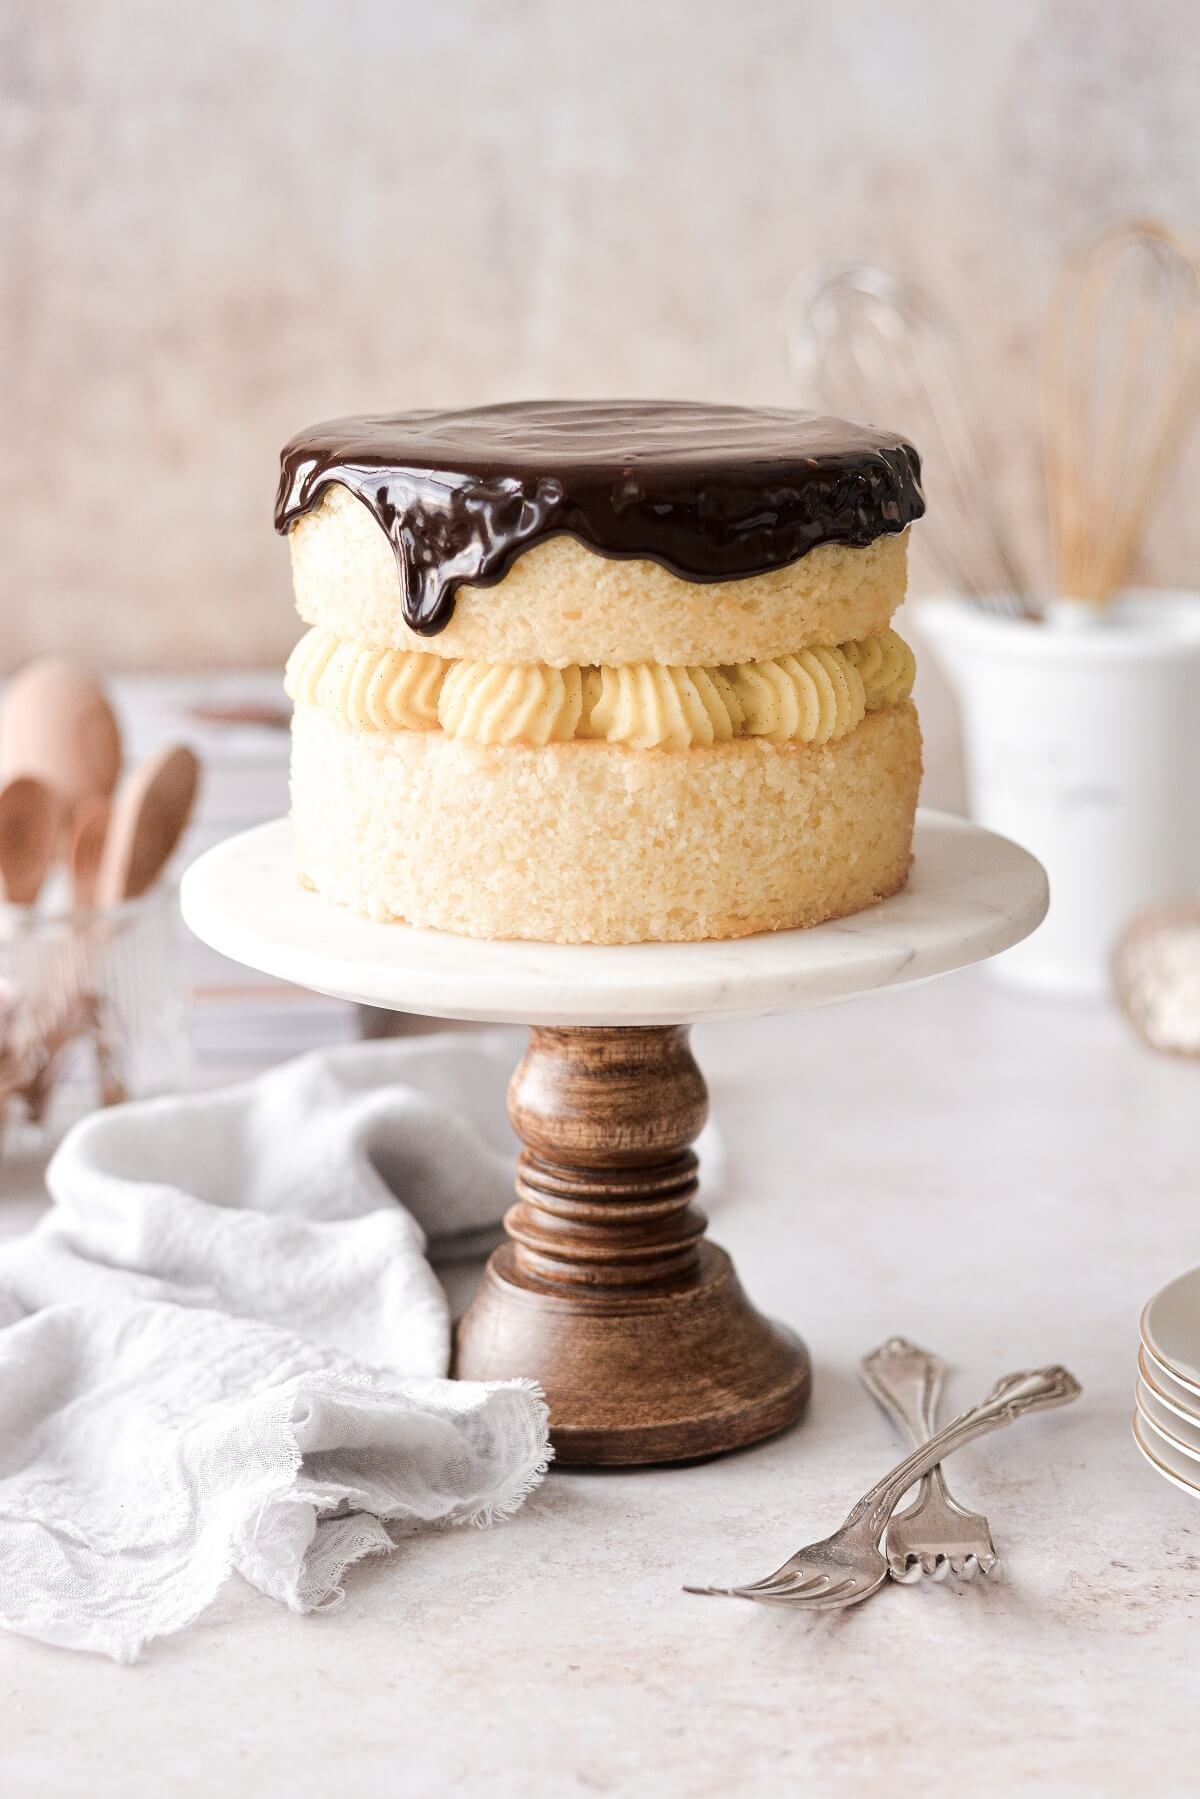 Boston cream pie on a marble and wood cake stand.